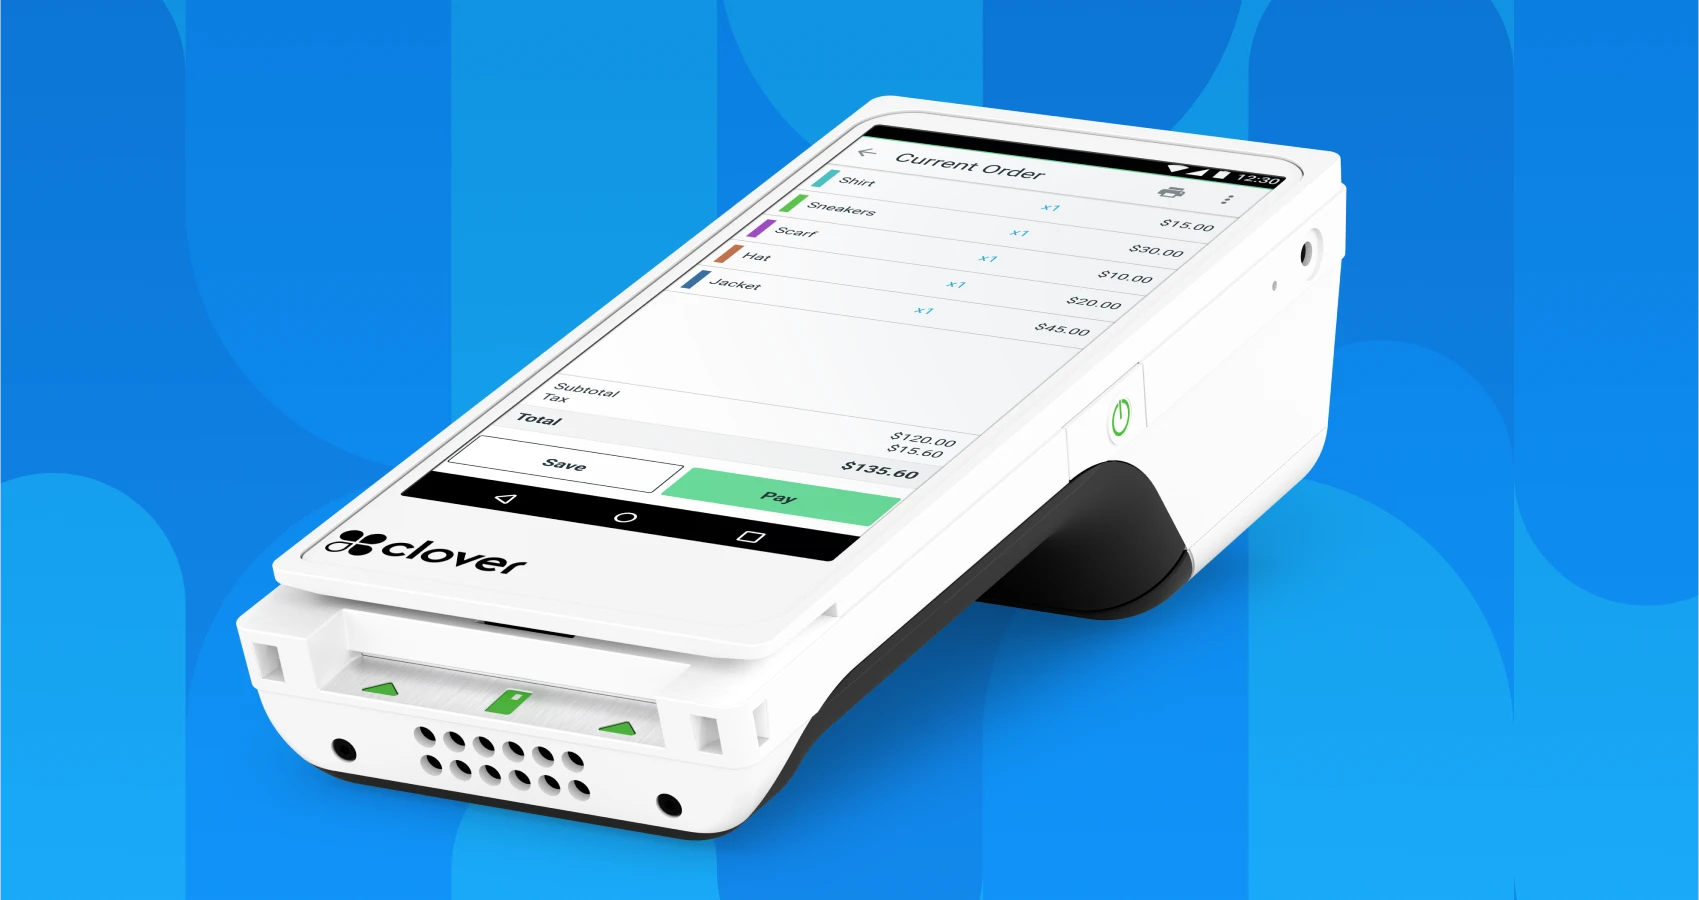 Image of Clover V3 POS system showcasing its sleek design and advanced features for efficient payment processing and business / restaurant management.